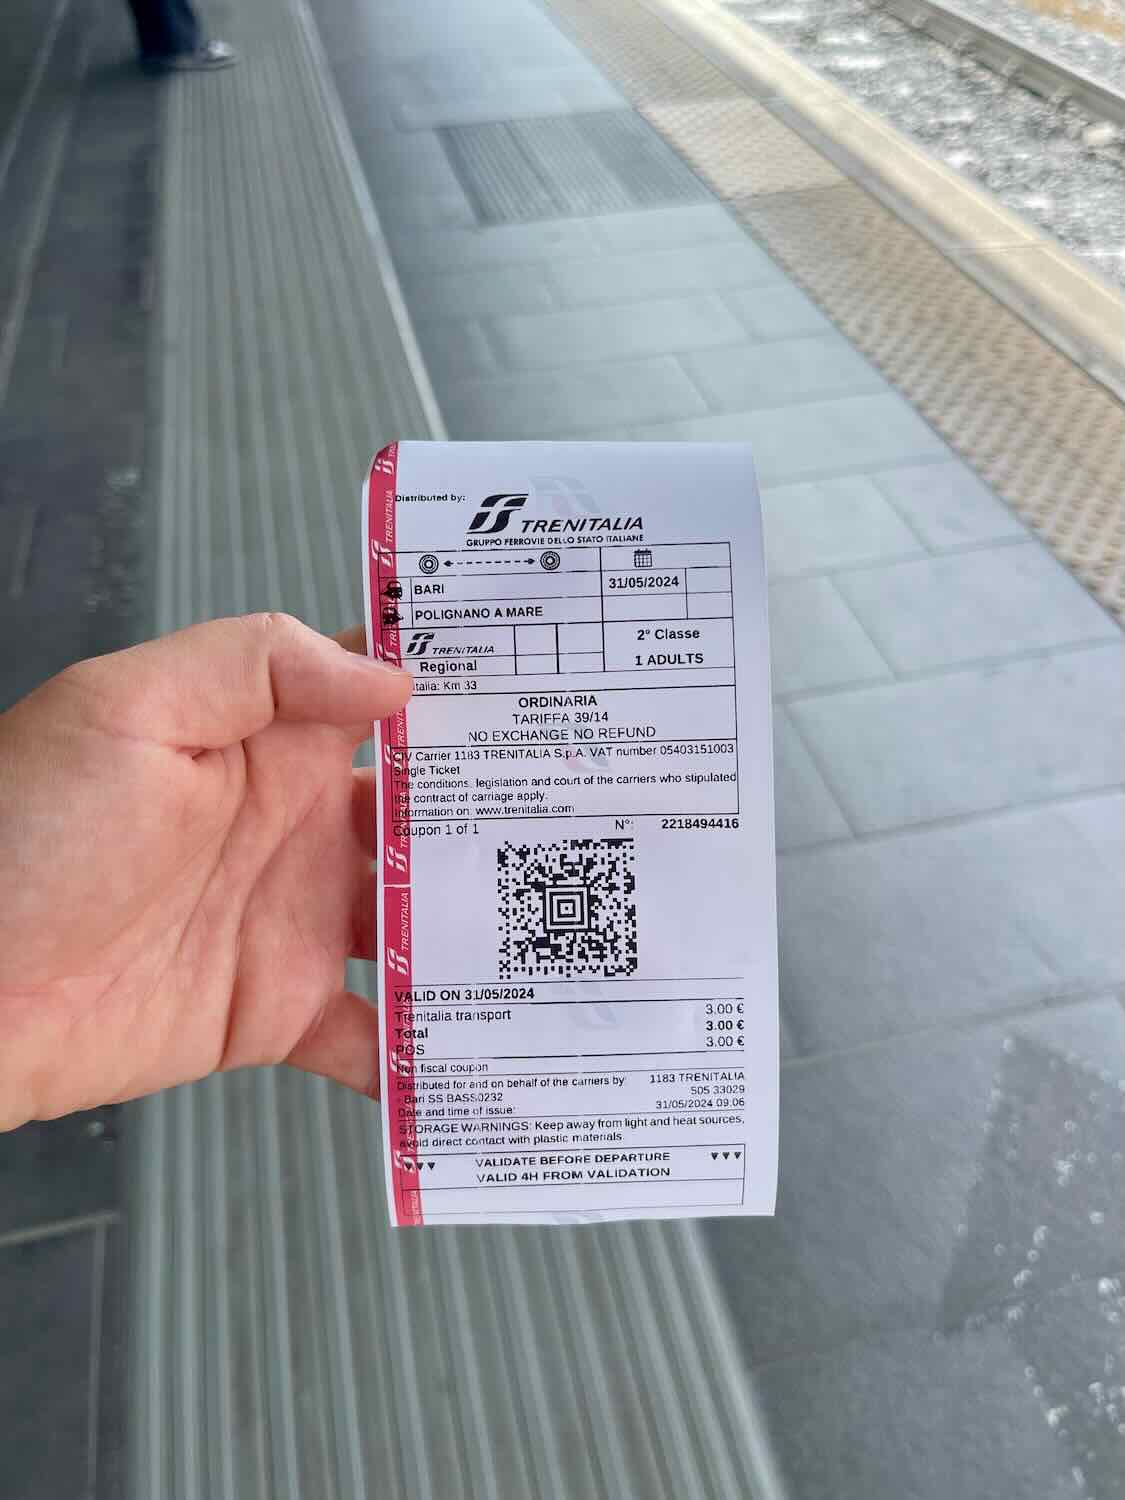 A close-up photo of a Trenitalia train ticket held by a person at a train station in Bari, Italy. The ticket indicates a journey from Bari to Polignano a Mare on 31/05/2024 in 2nd class. It includes a QR code for validation and a fare of 3.00 Euros.